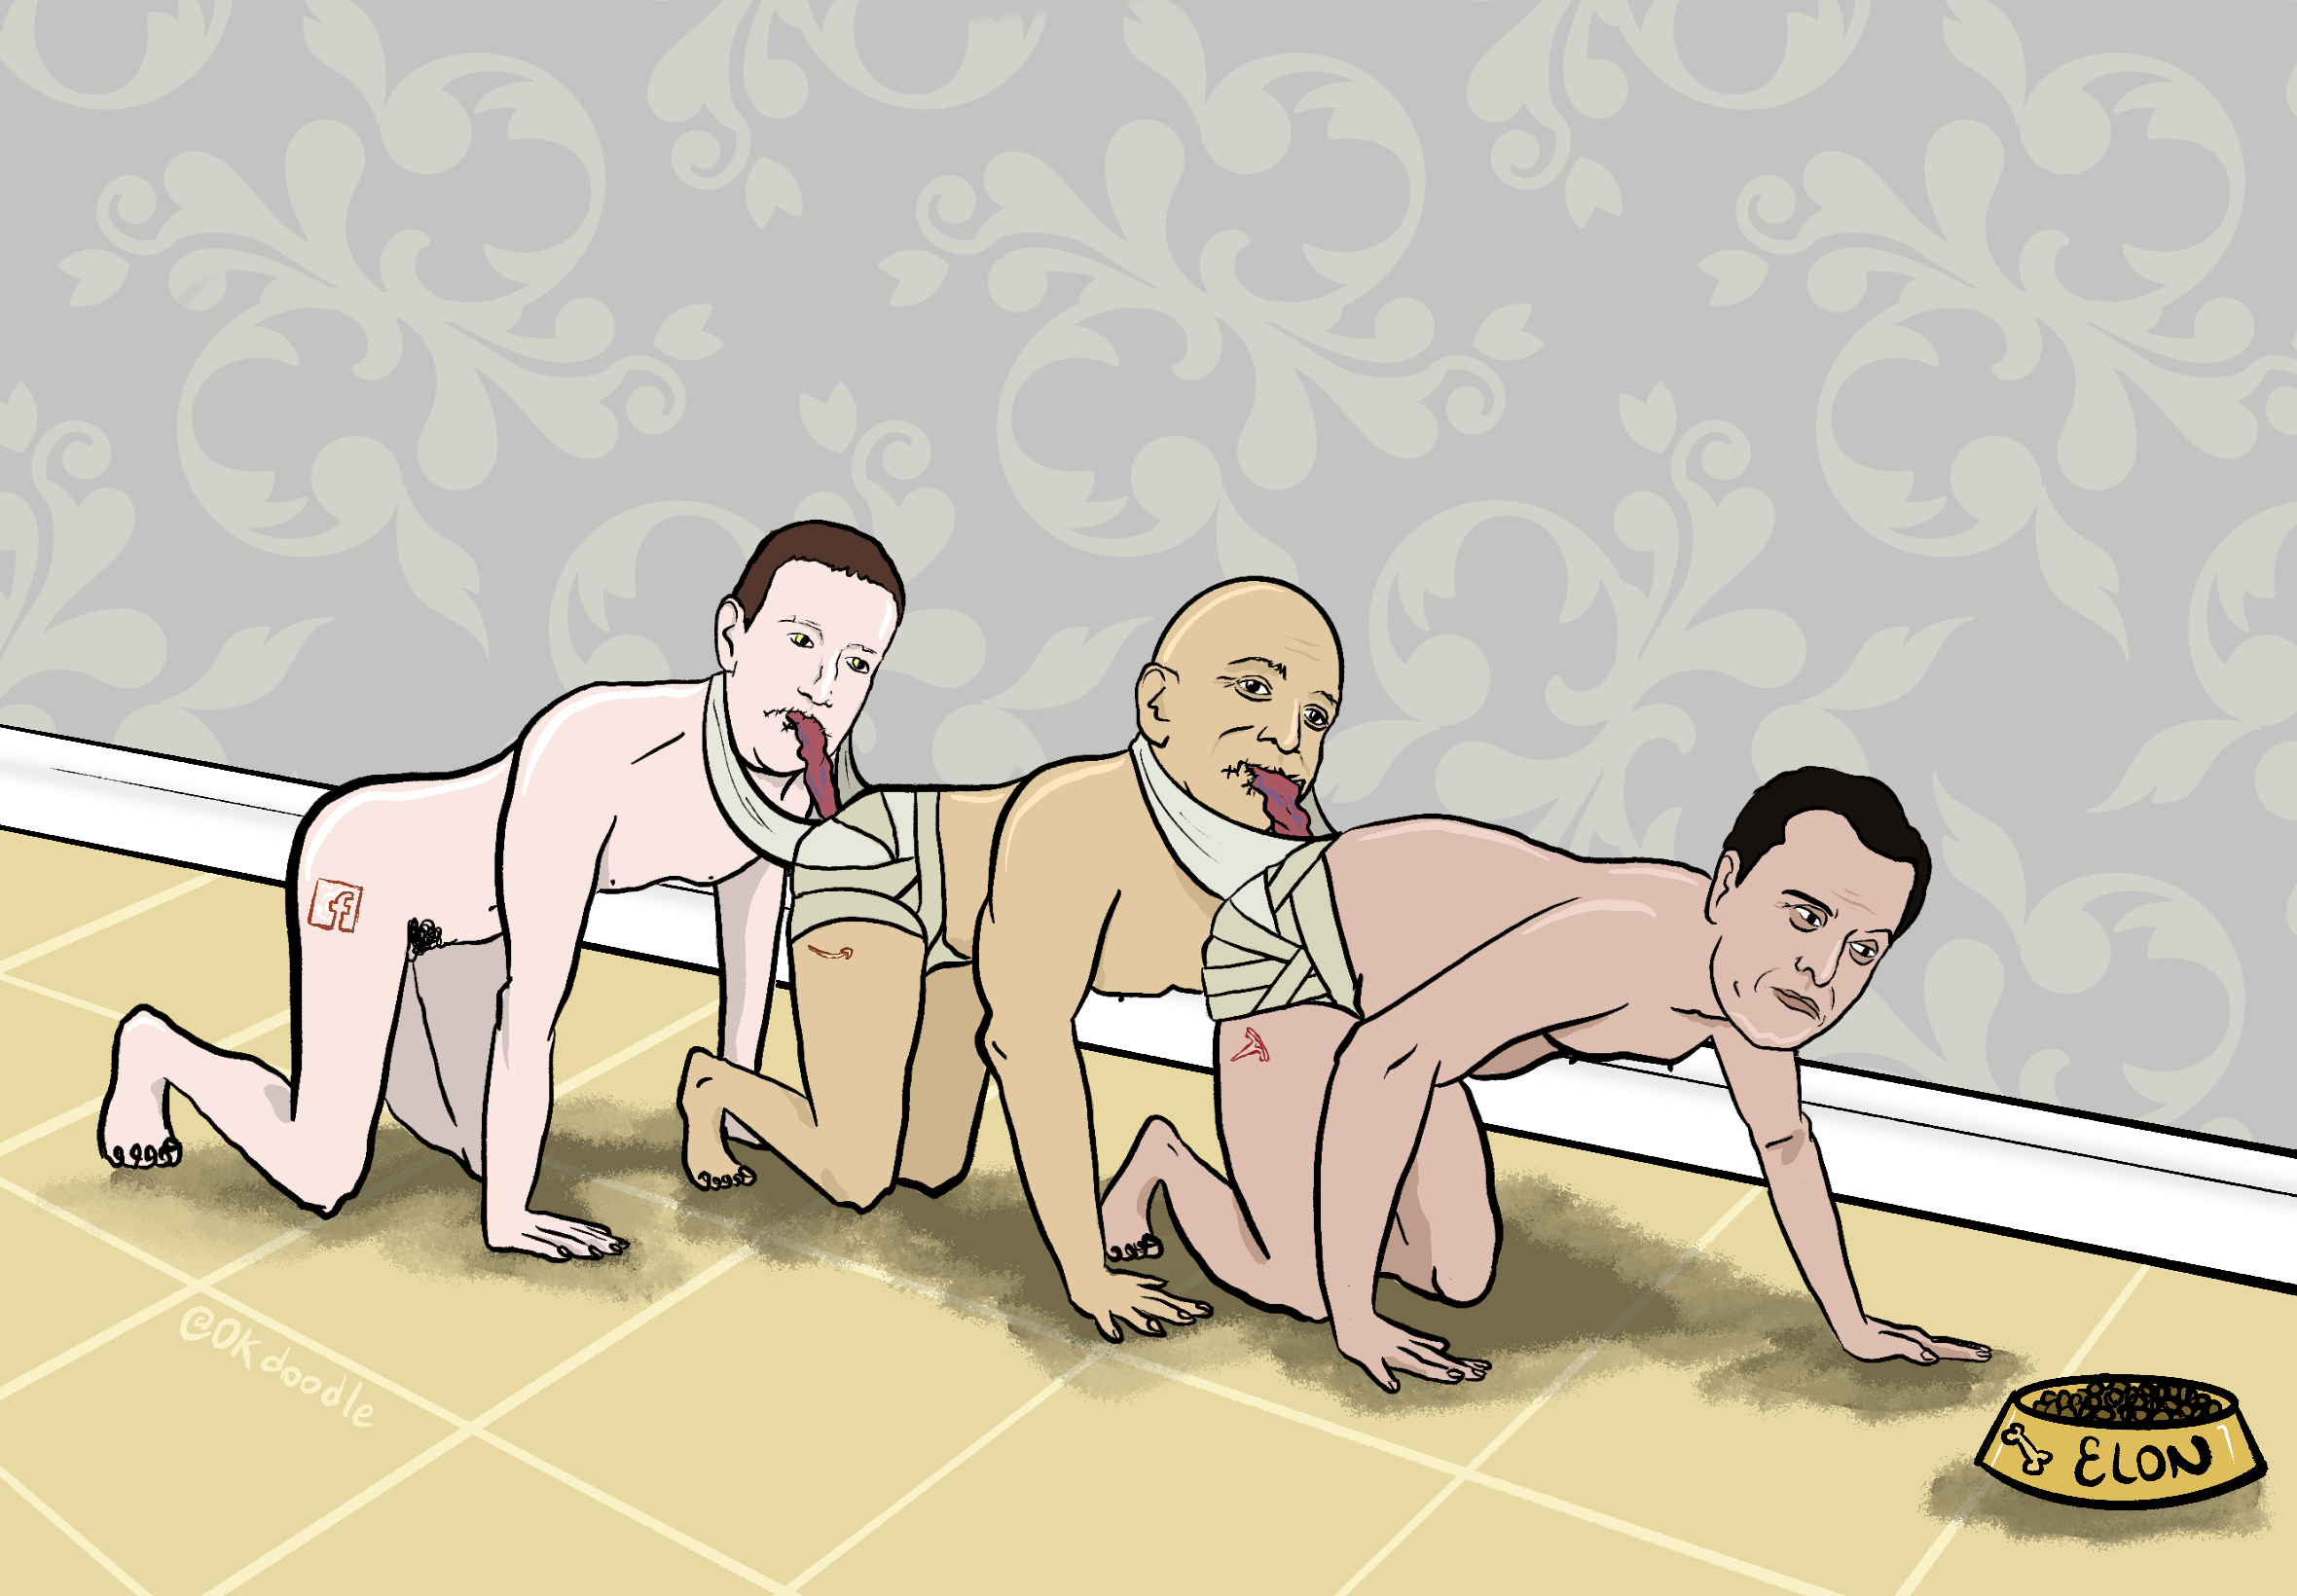 A human centipede made of Elon Musk at the front, Jeff Bezos in the middle, and Mark Zuckerberg at the back.